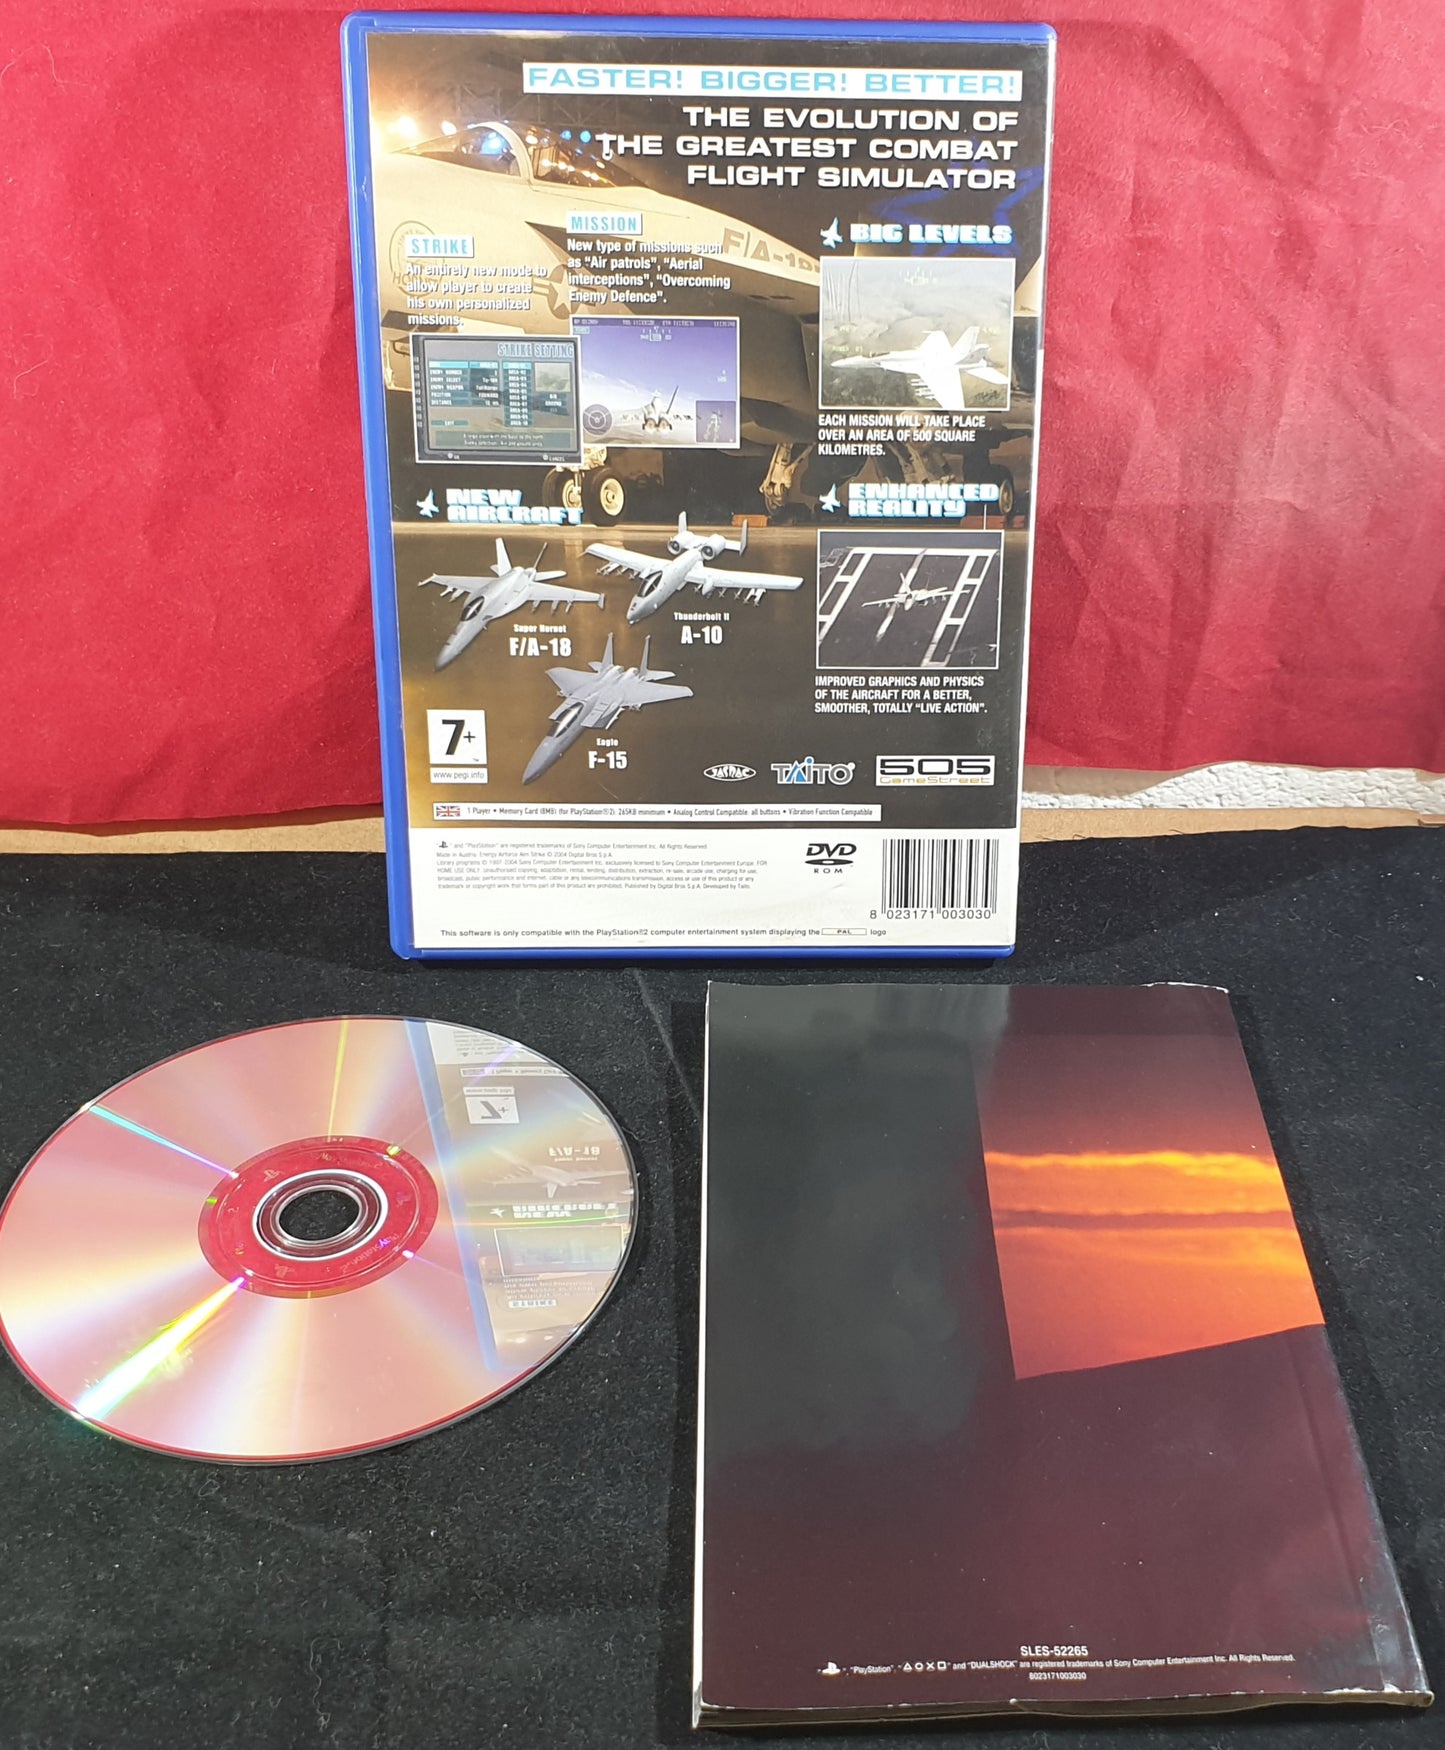 Energy Airforce Aim Strike Sony Playstation 2 (PS2) RARE Game